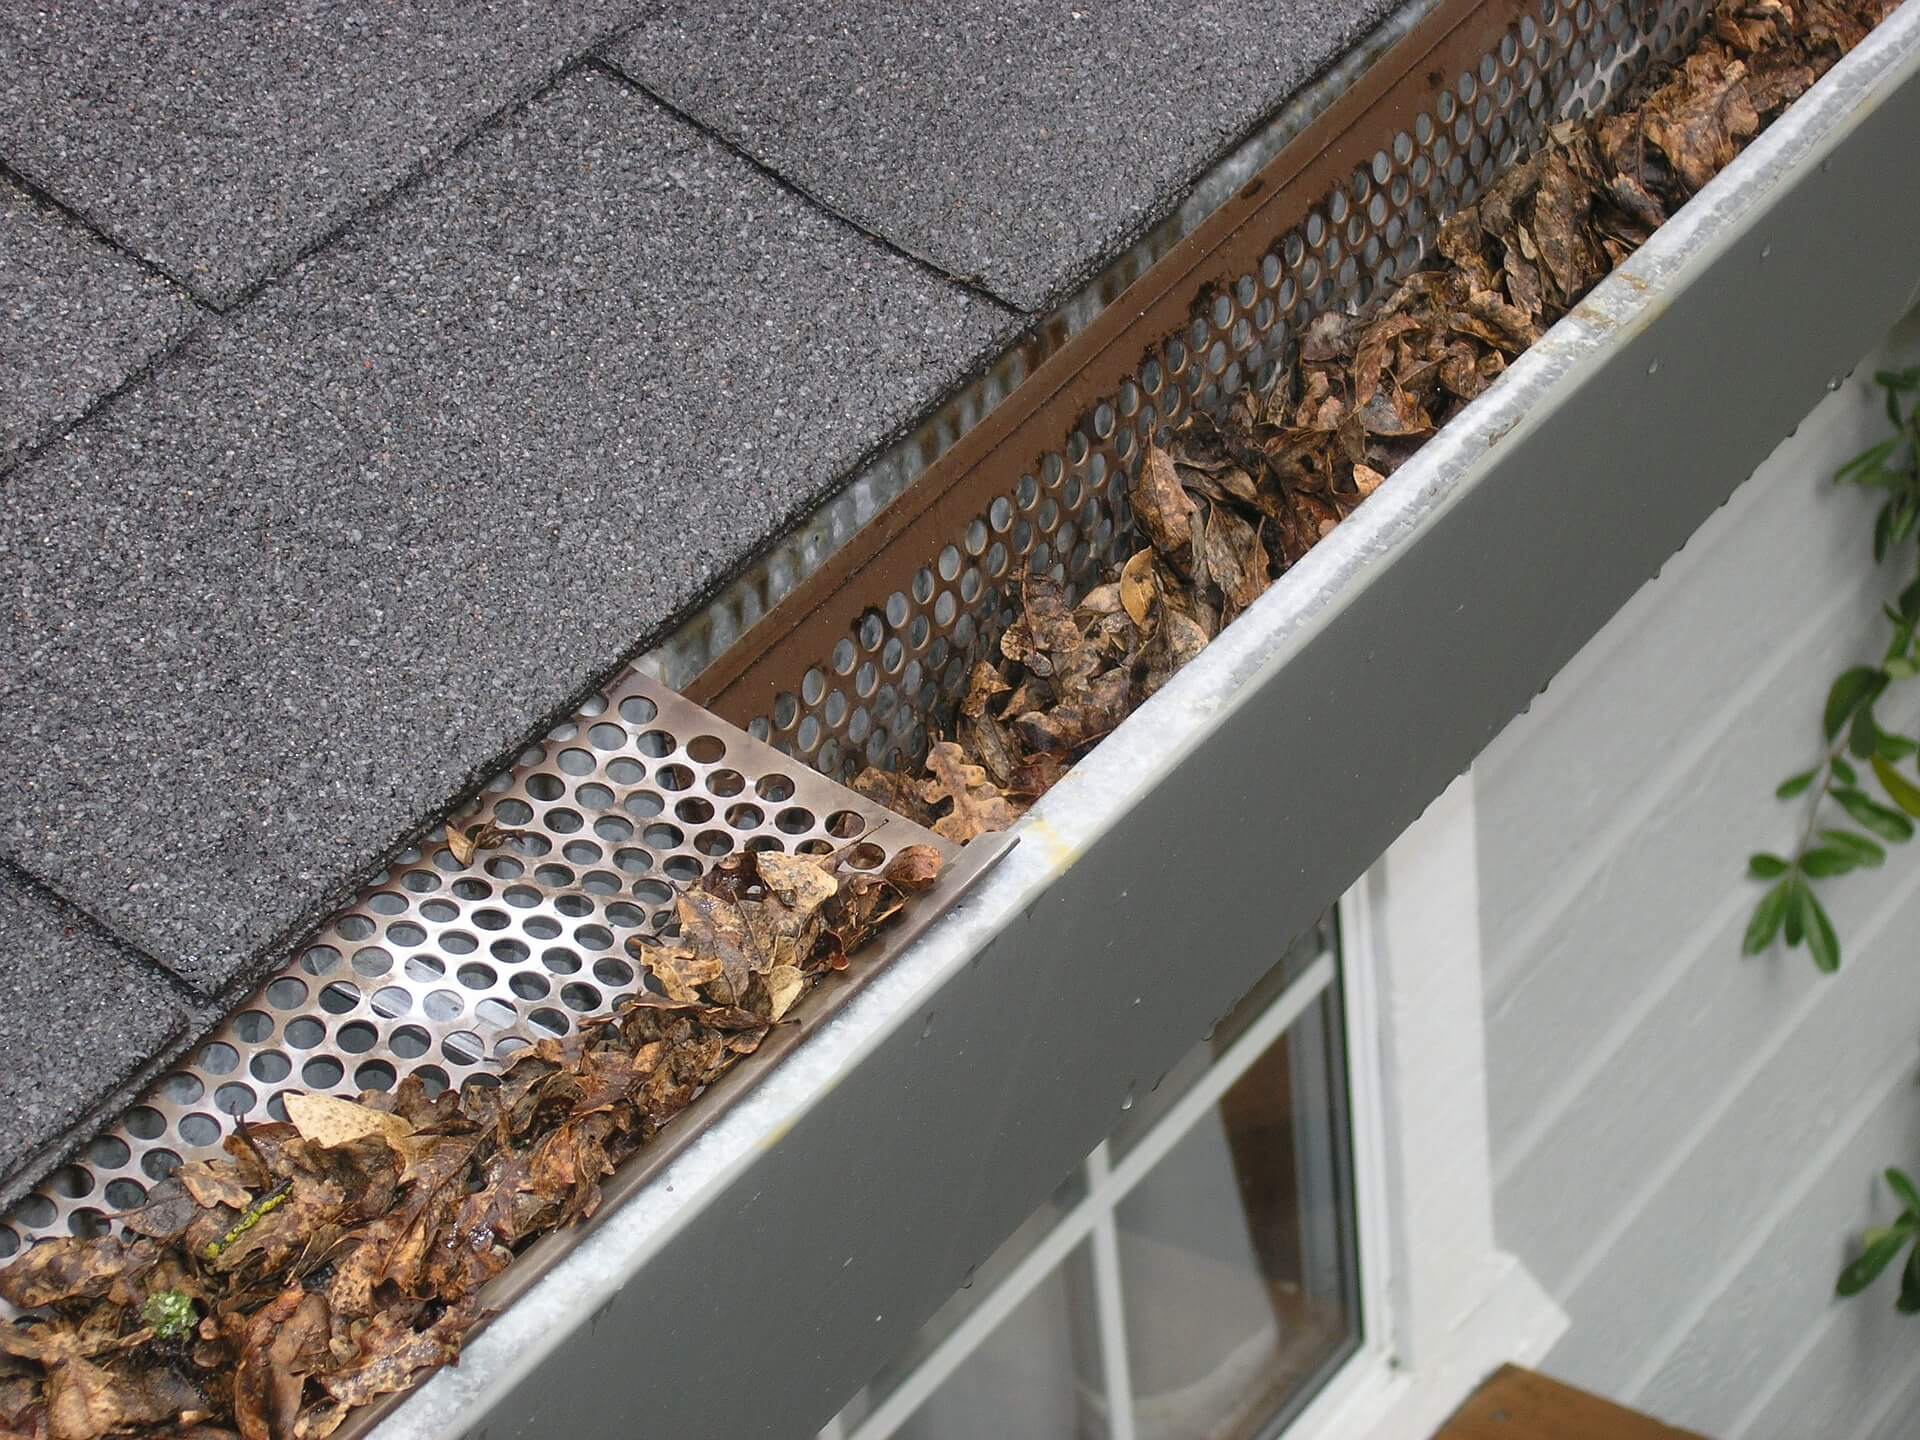 A gutter clogged with debris.